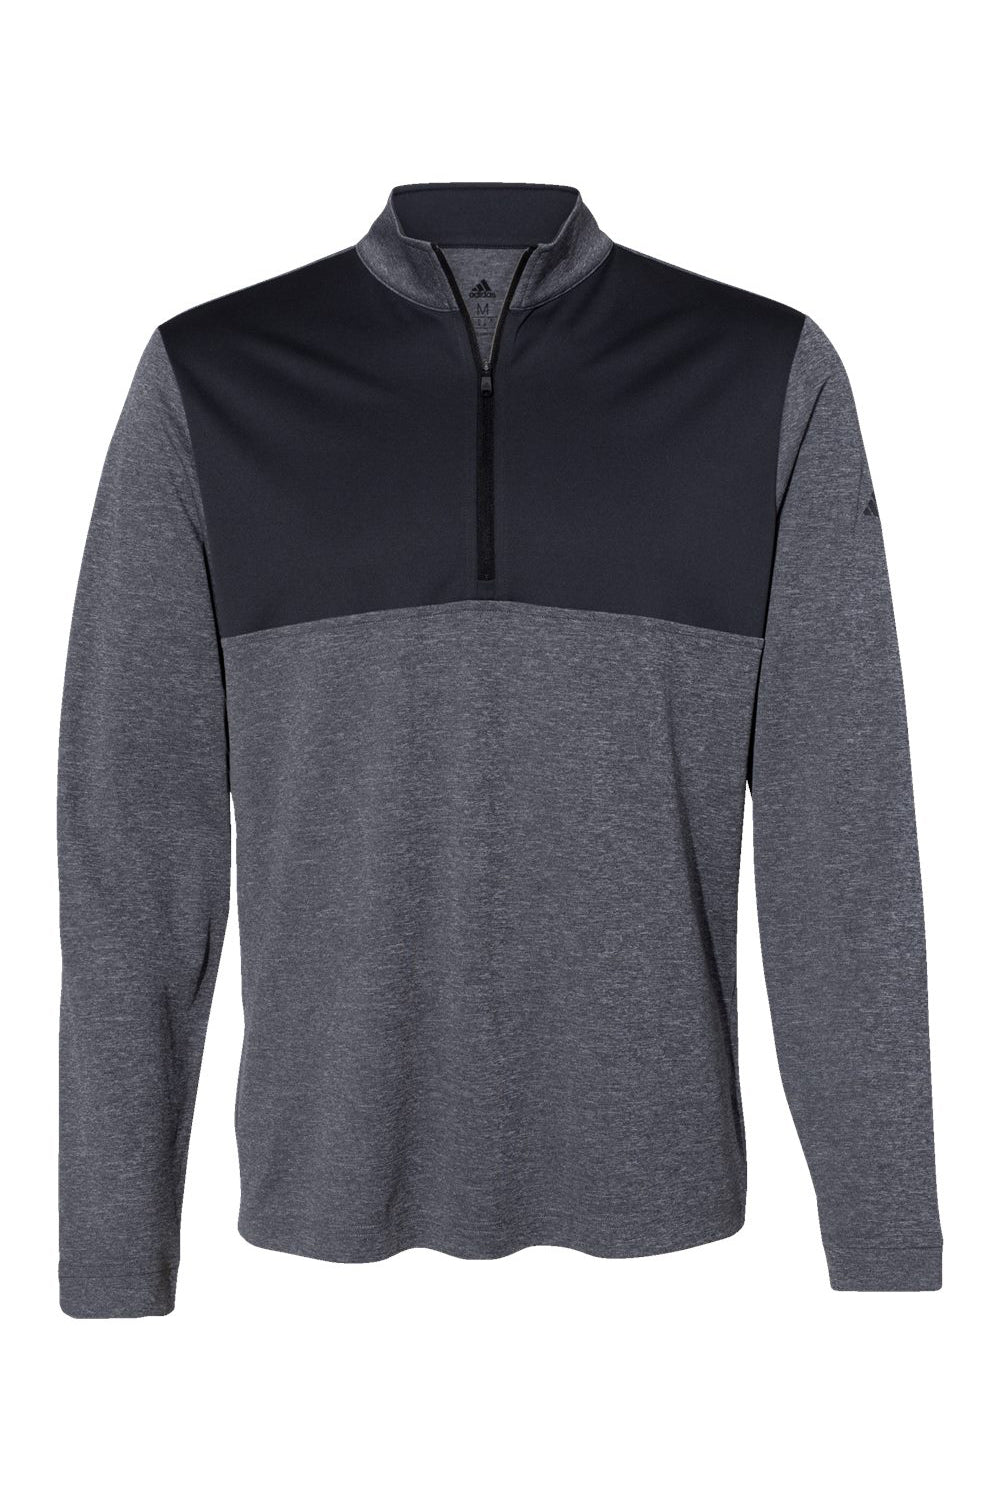 Adidas A280 Mens 1/4 Zip Pullover Heather Black/Carbon Grey Flat Front